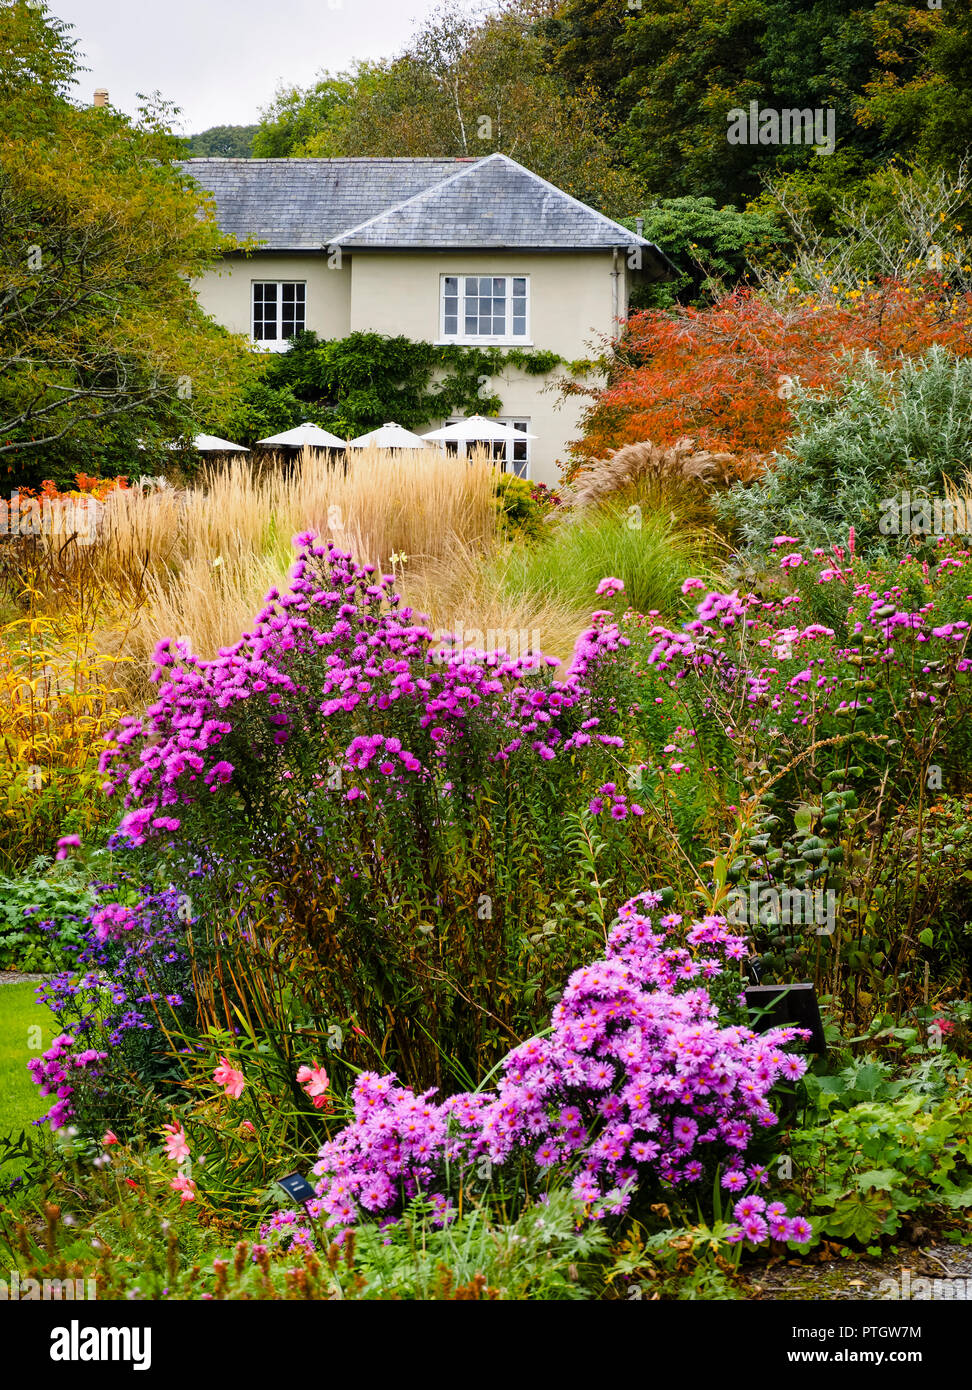 Compressed perspective view over the Autumn hues of the Summer garden at The Garden House, Buckland Monachorum, Devon, UK Stock Photo